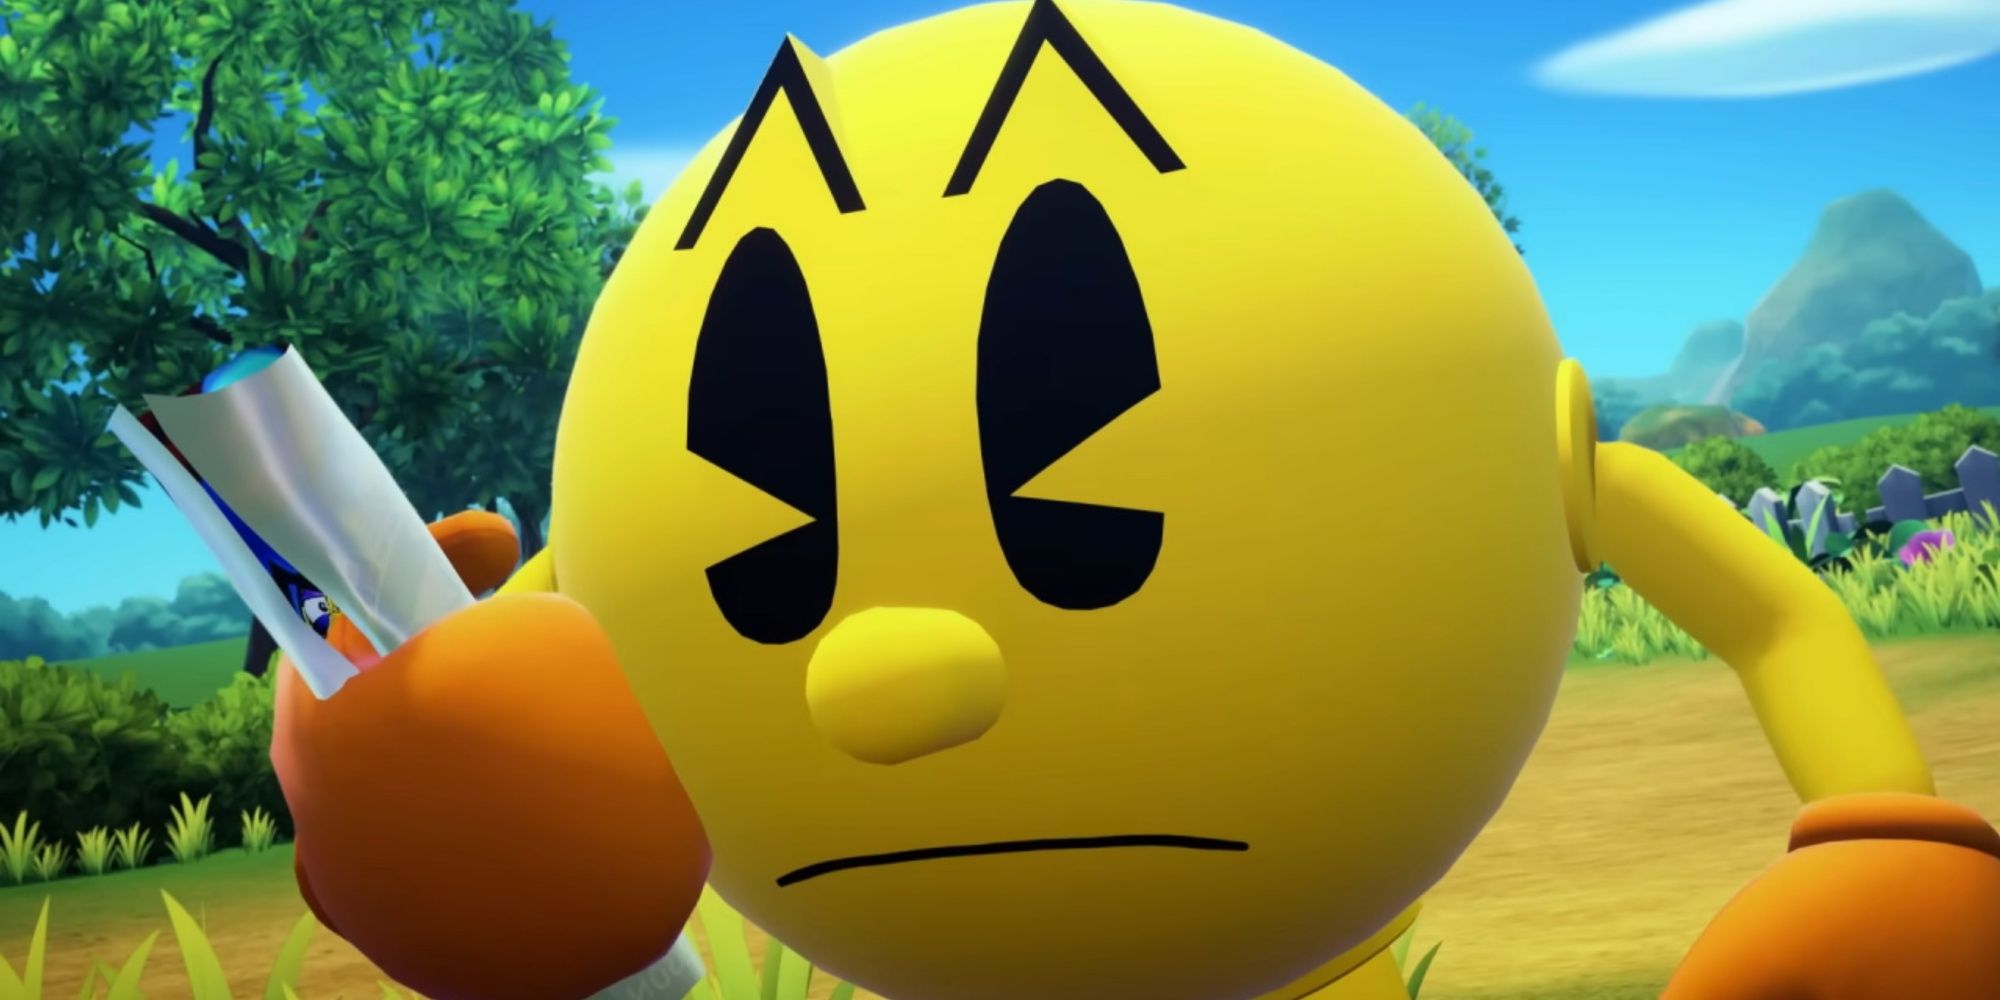 pac-man holding paper and looking frustrated